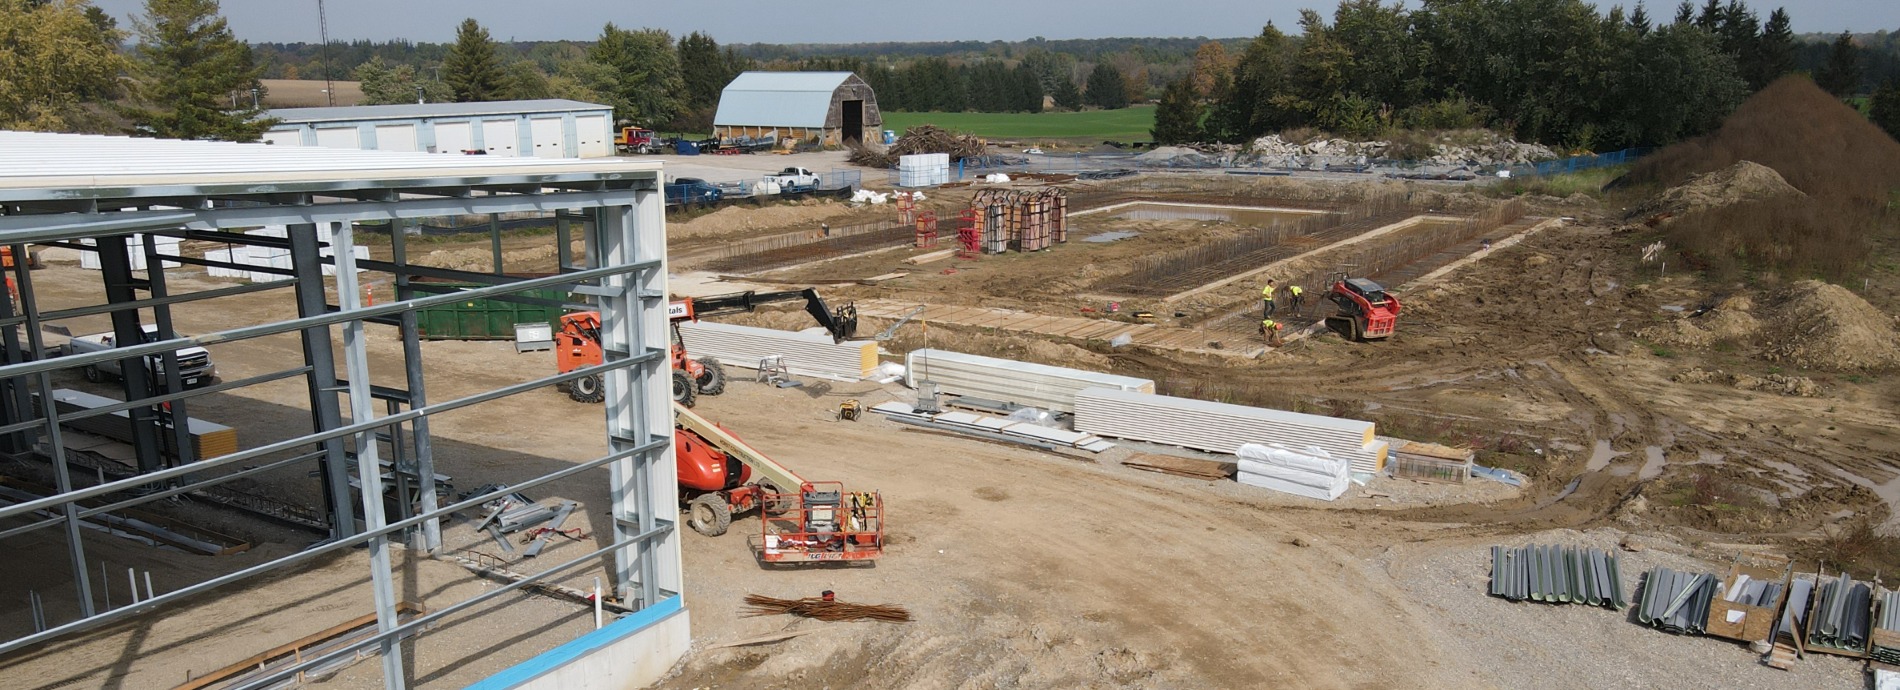 new municipal building being built, cement pad with steel structure and supplies laying on the ground near the building